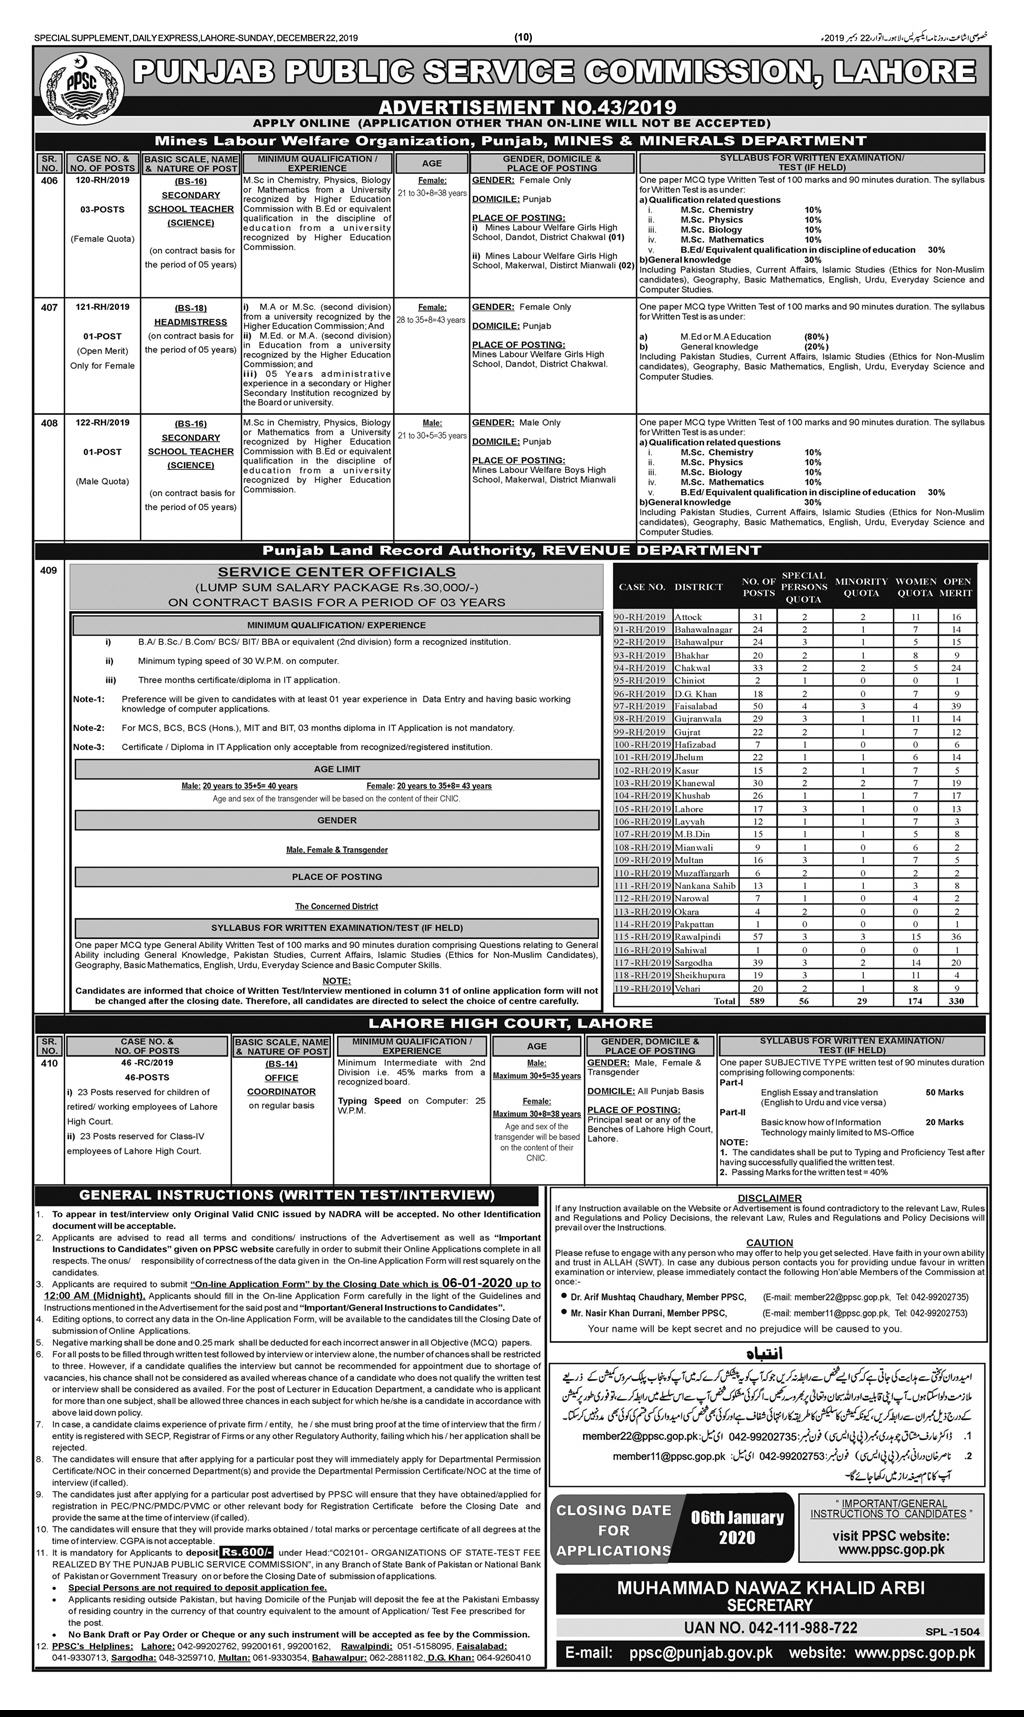 PPSC Jobs in Punjab Land Record Authority